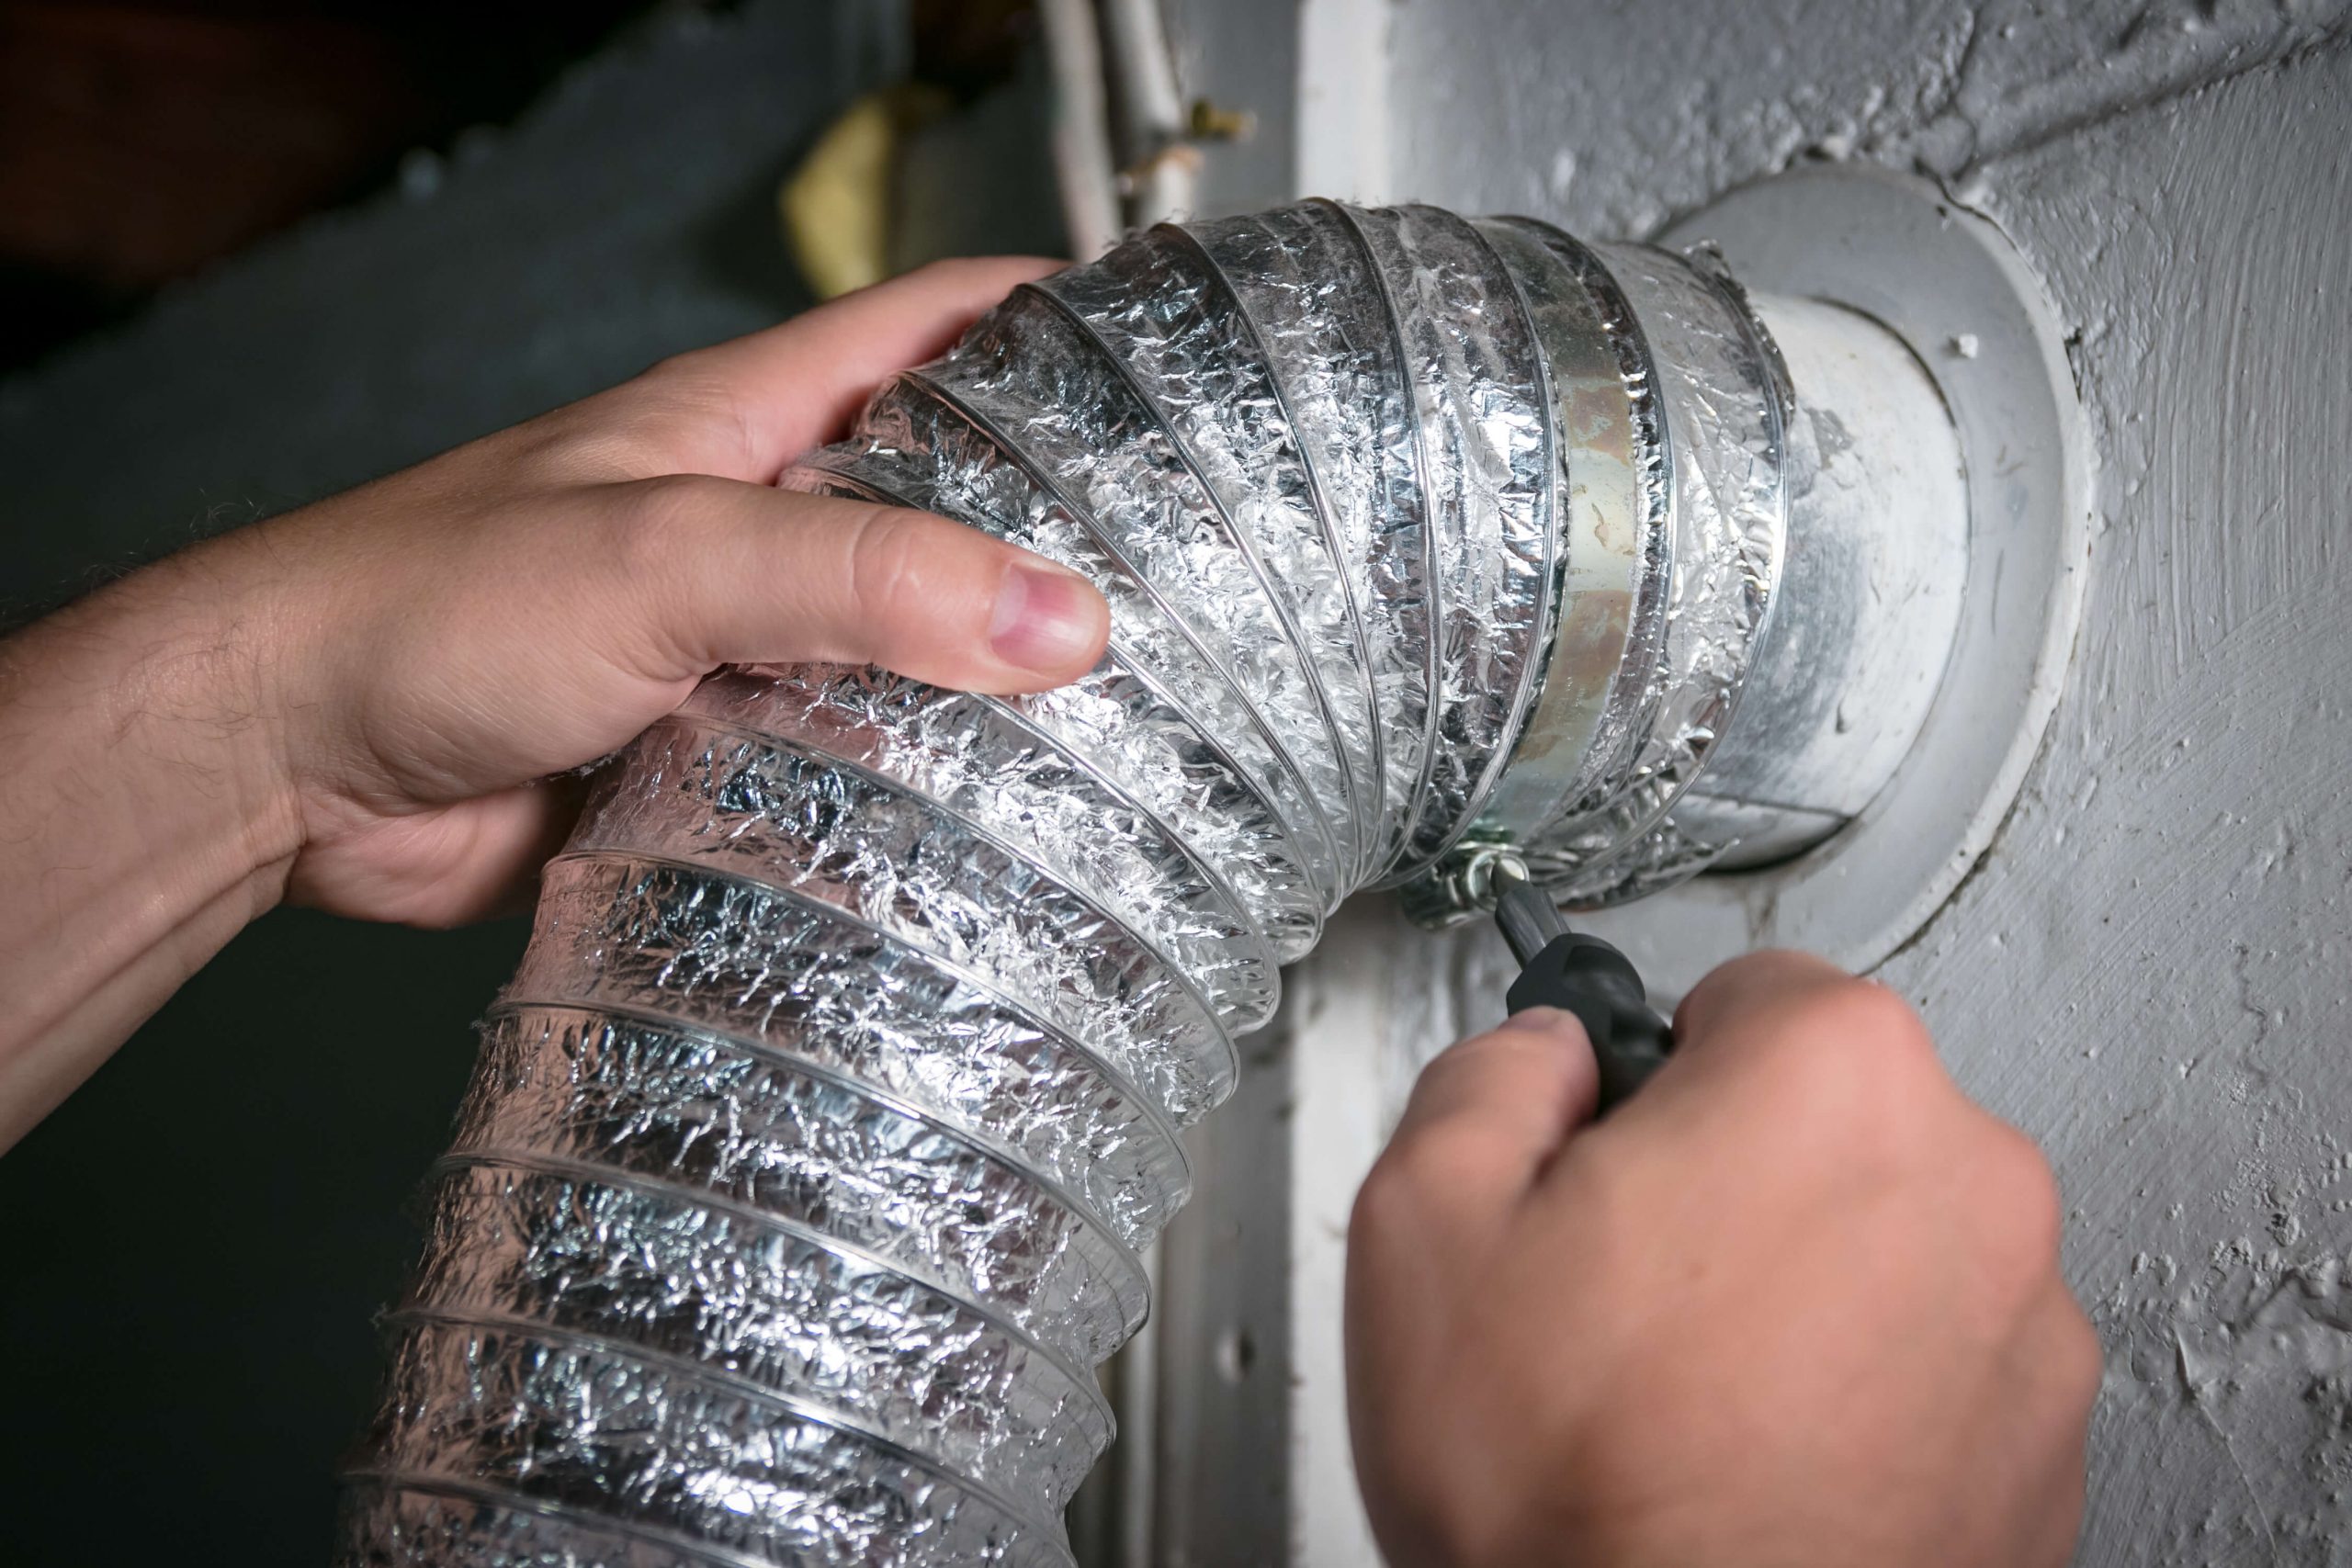 dryer vent cleaning residential Vancouver